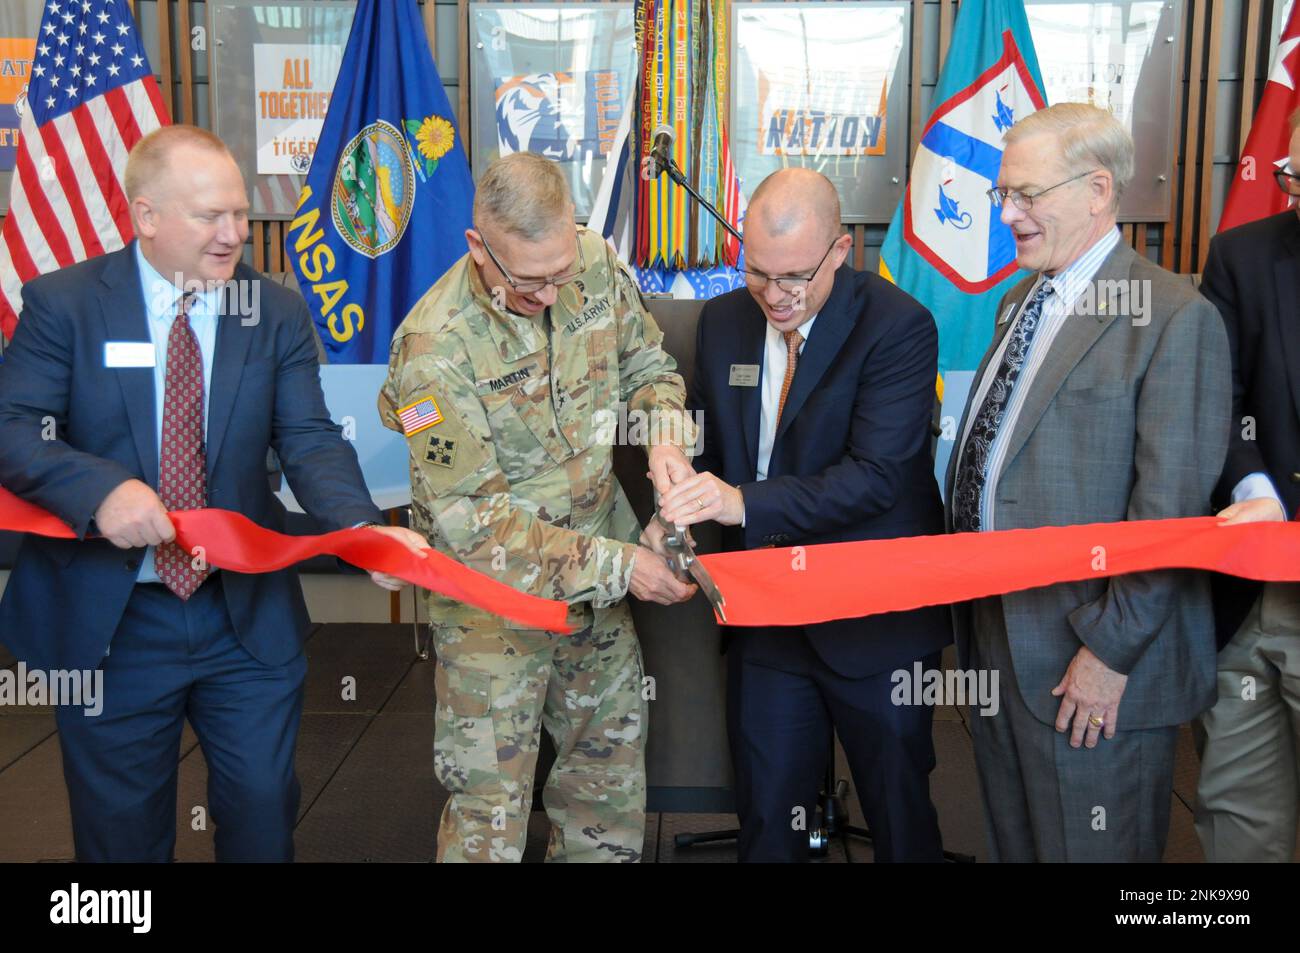 Lt. Gen. Theodore D. Martin (second from left), commanding general for the U.S. Army Combined Arms Center and Fort Leavenworth, along with Dr. Keith Mispagel (left), superintendent for Fort Leavenworth USD 207, Tyler Fowler (second from right), Patton Junior High School principal, and Myron Griswold (right), president of the Fort Leavenworth USD 207 Board of Education, cut the ribbon for the new Patton Junior High School on Fort Leavenworth.  In November 2018, the Fort Leavenworth Board of Education began the process of replacing the original Patton Junior High School which was built in 1958. Stock Photo